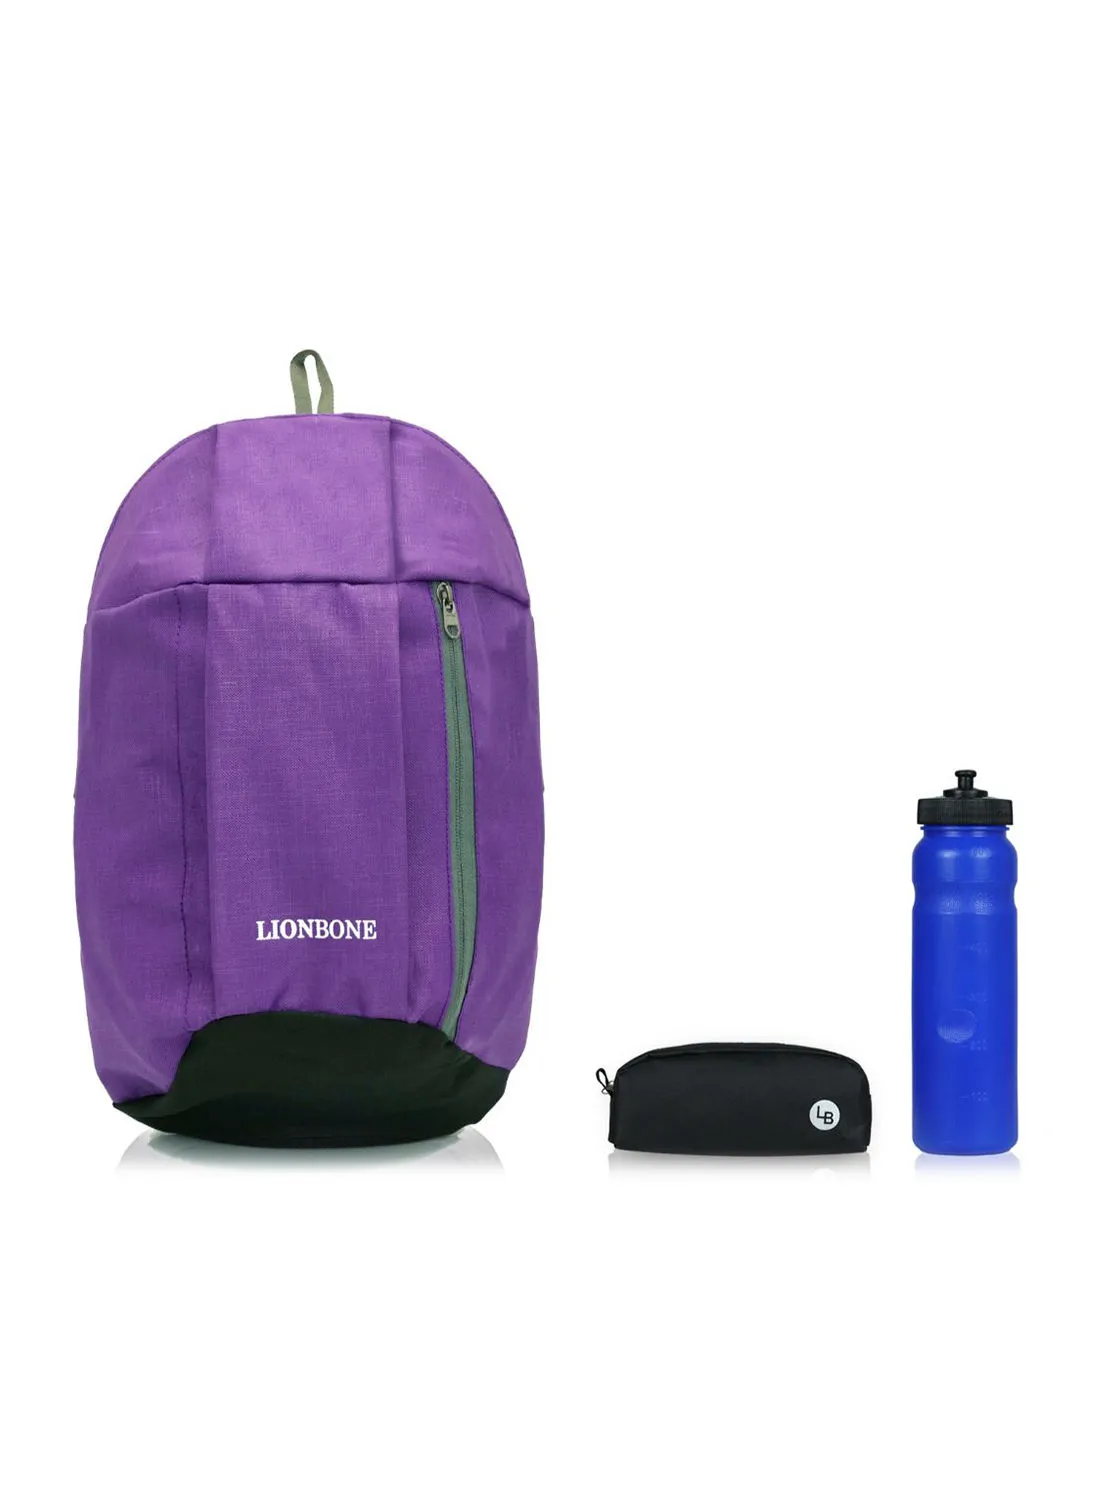 LIONBONE Combo of Backpack, Pouch and Sipper Purple/Black